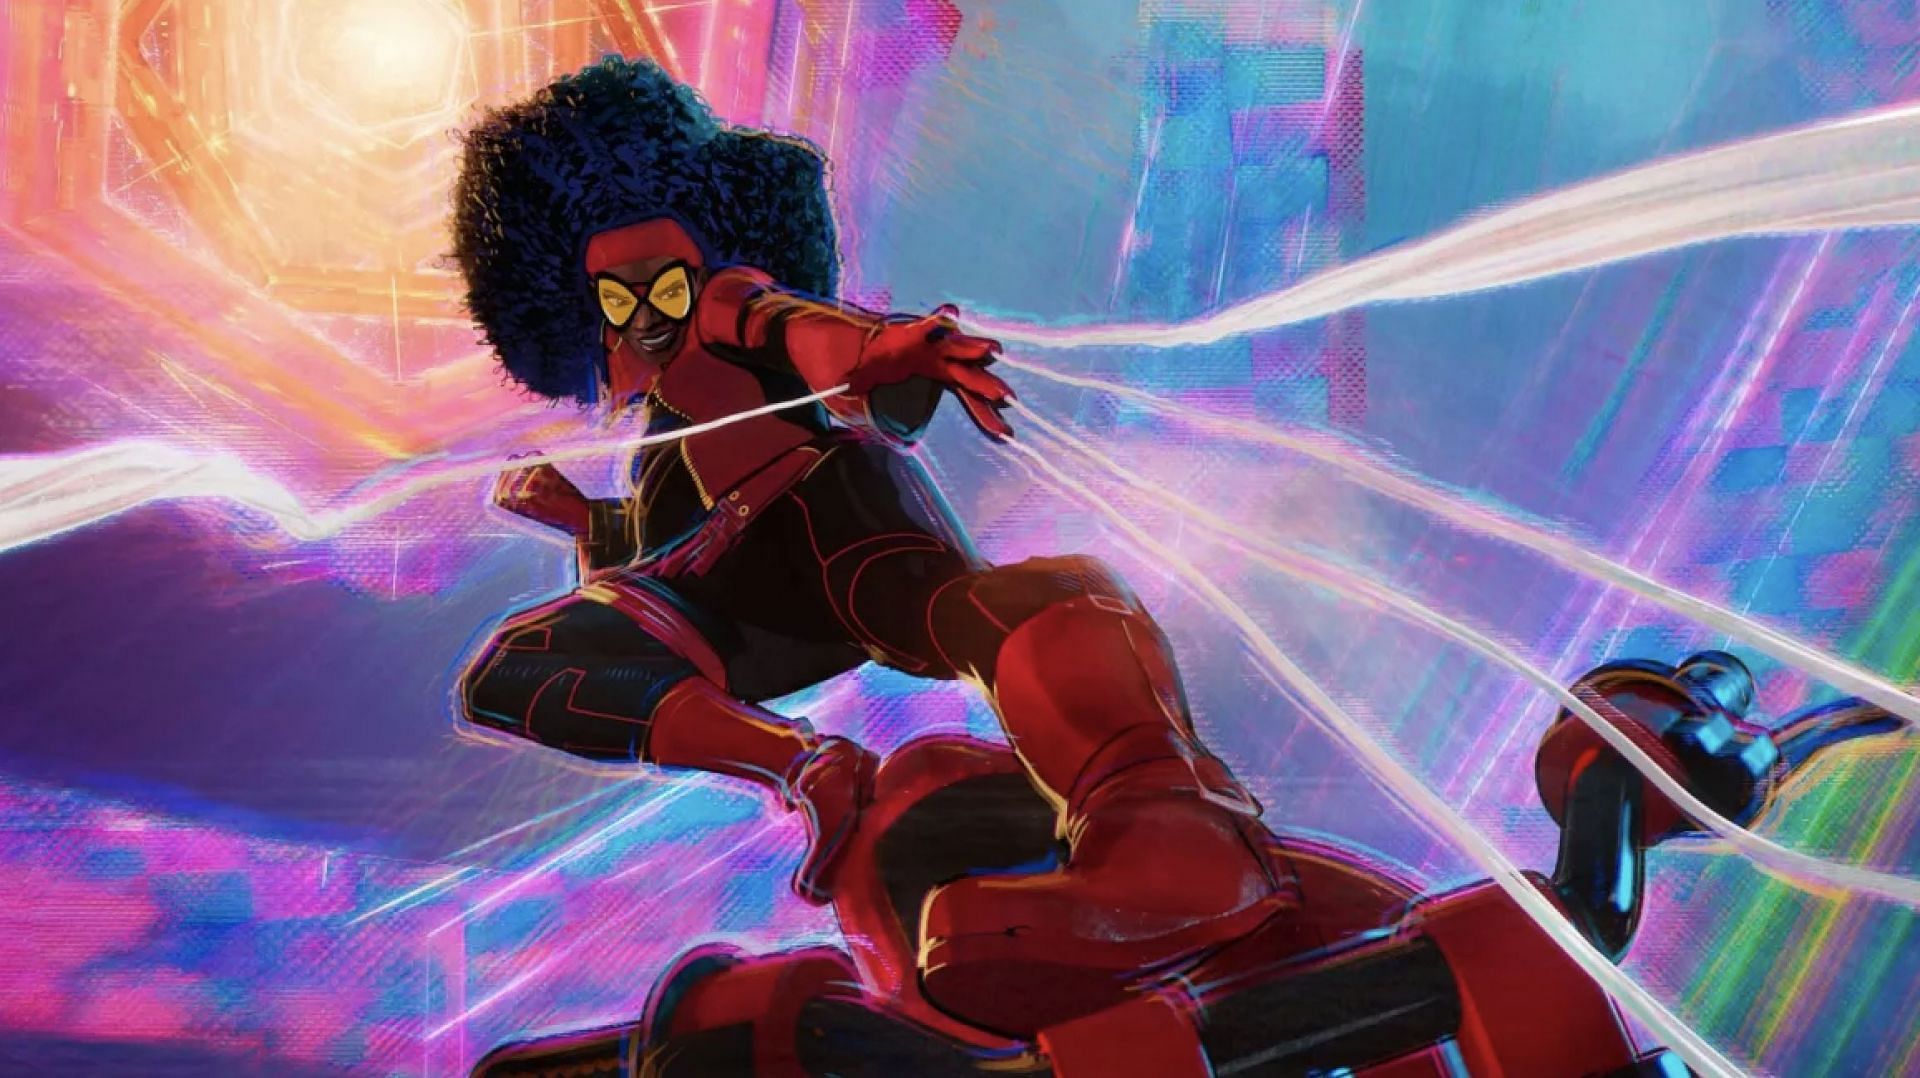 A new Spider-Woman is also teased, potentially hinting at future appearances in the franchise (Image via Sony Pictures)